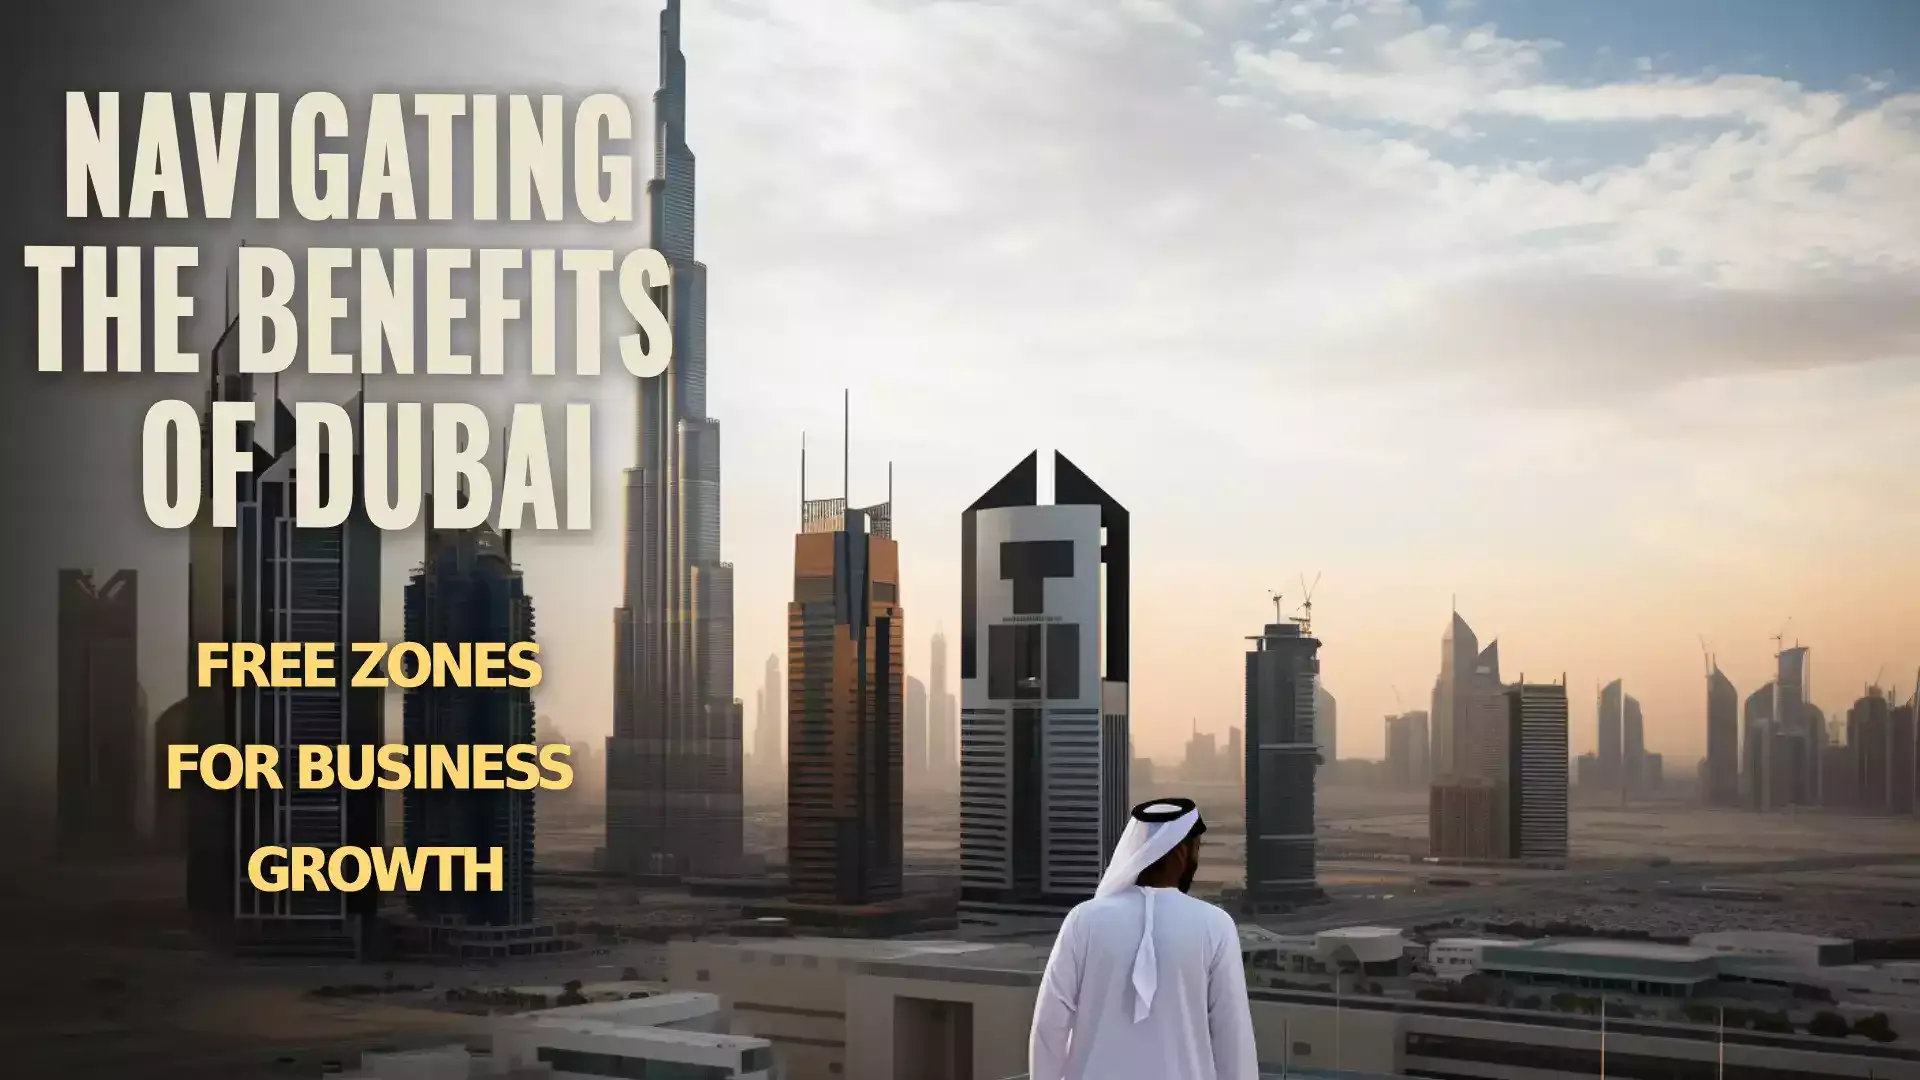 Image illustrating the benefits and advantages of Dubai Free Zones for businesses